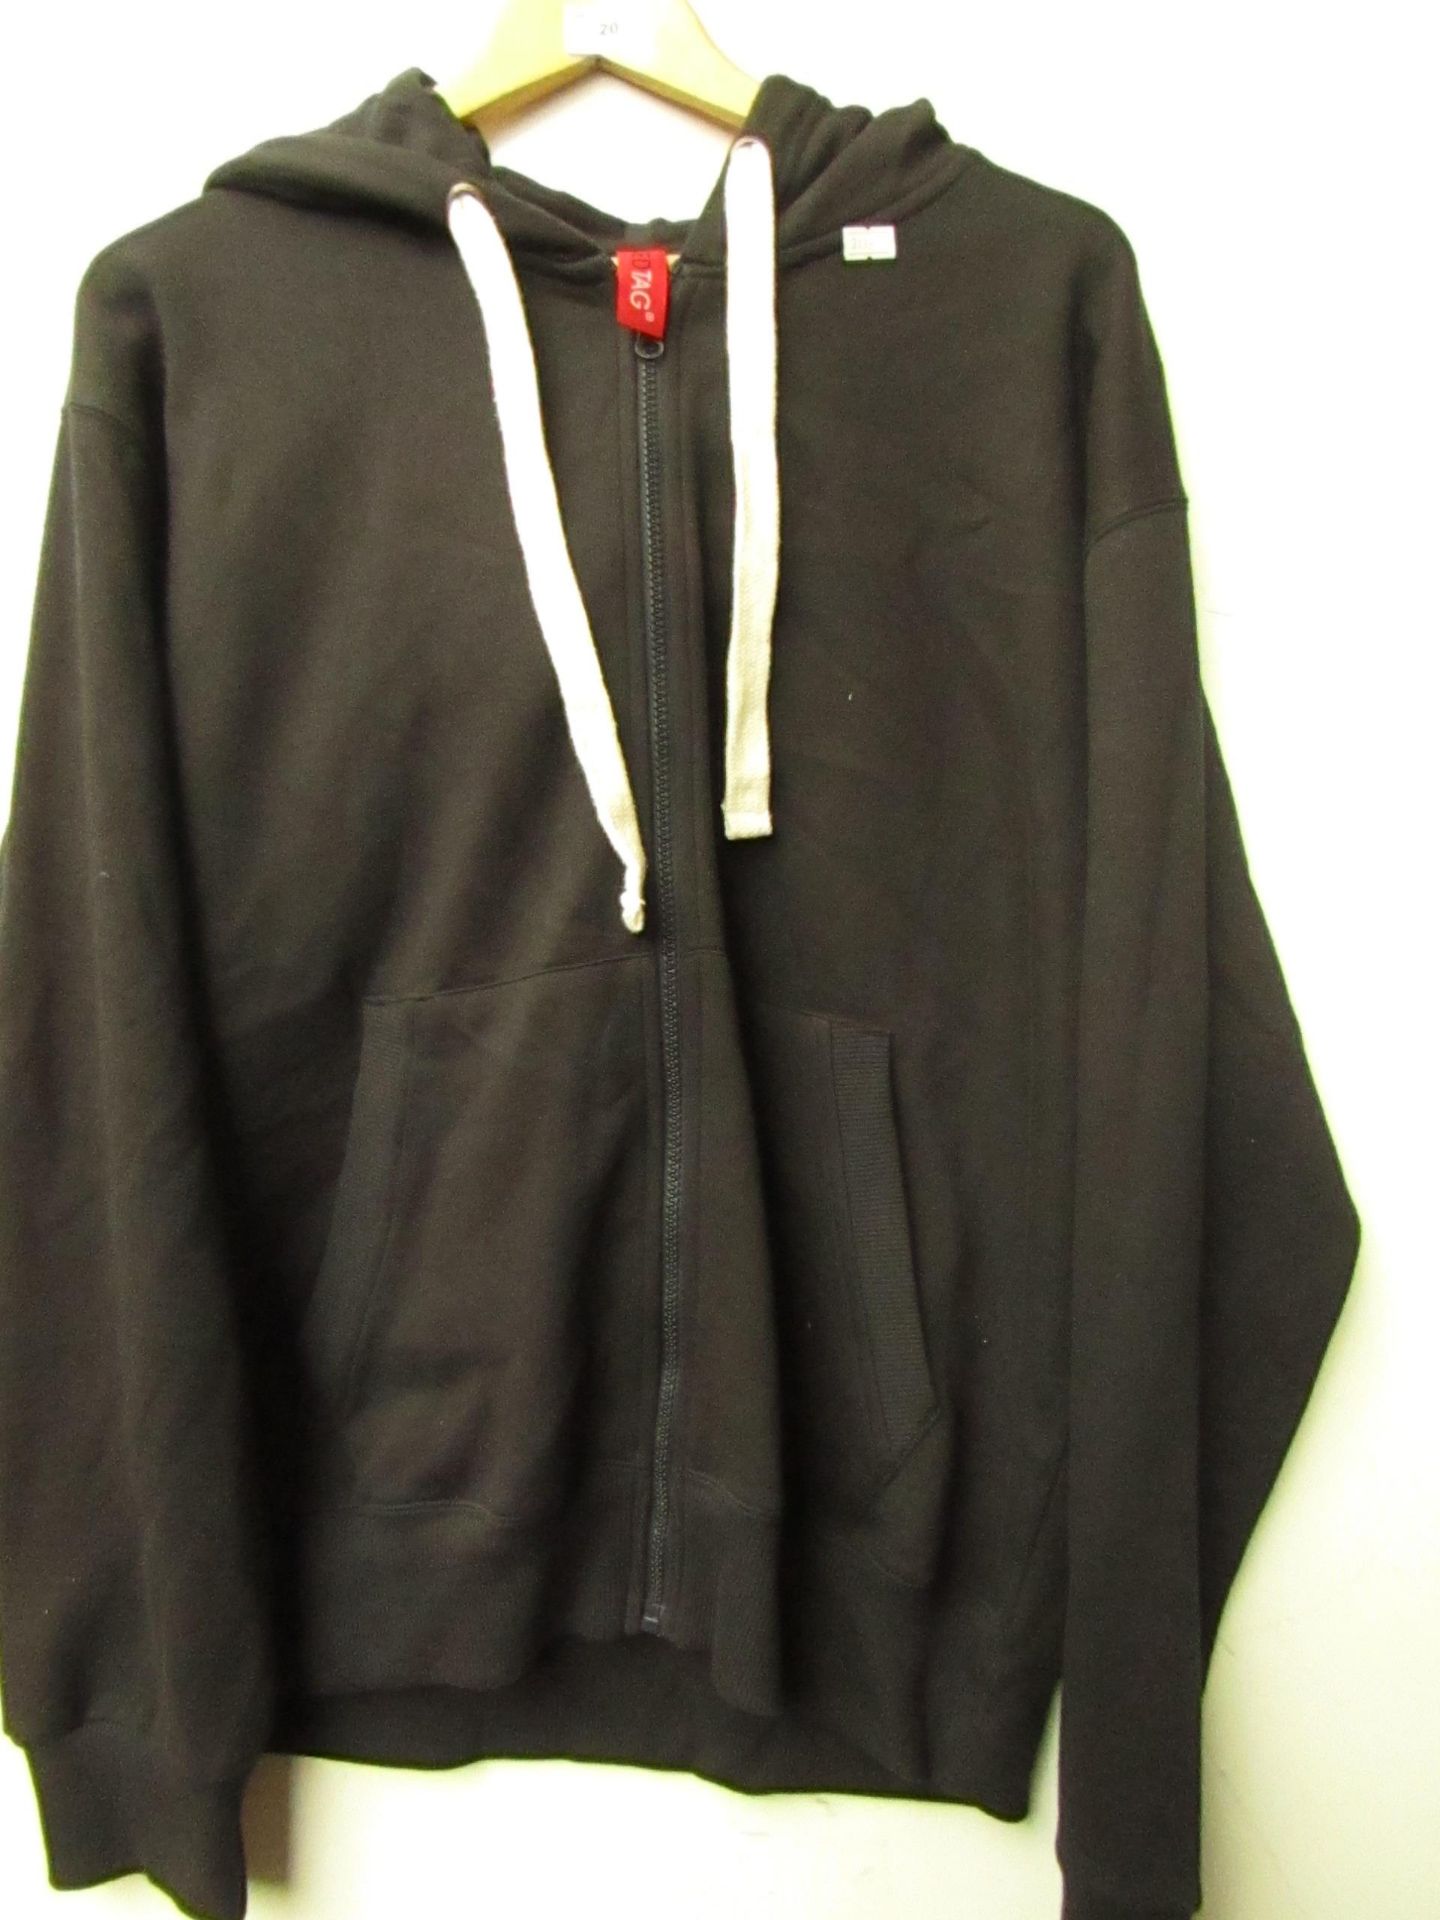 Red Tag Zip up Hoody. Size Large.